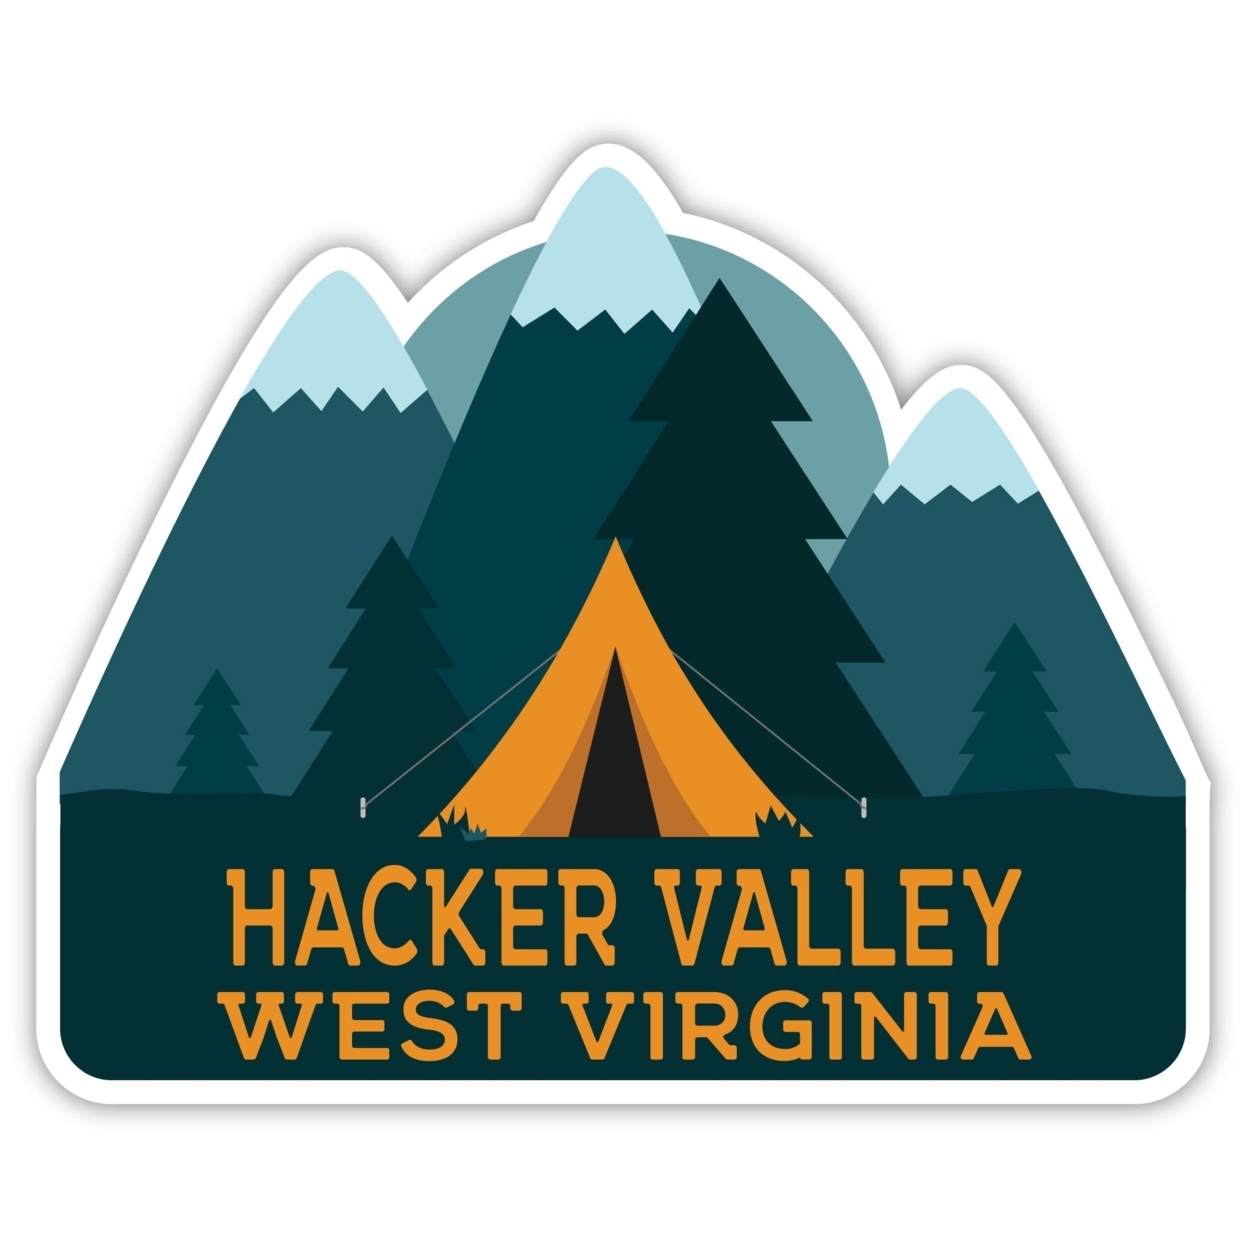 Hacker Valley West Virginia Souvenir Decorative Stickers (Choose Theme And Size) - 4-Pack, 8-Inch, Tent